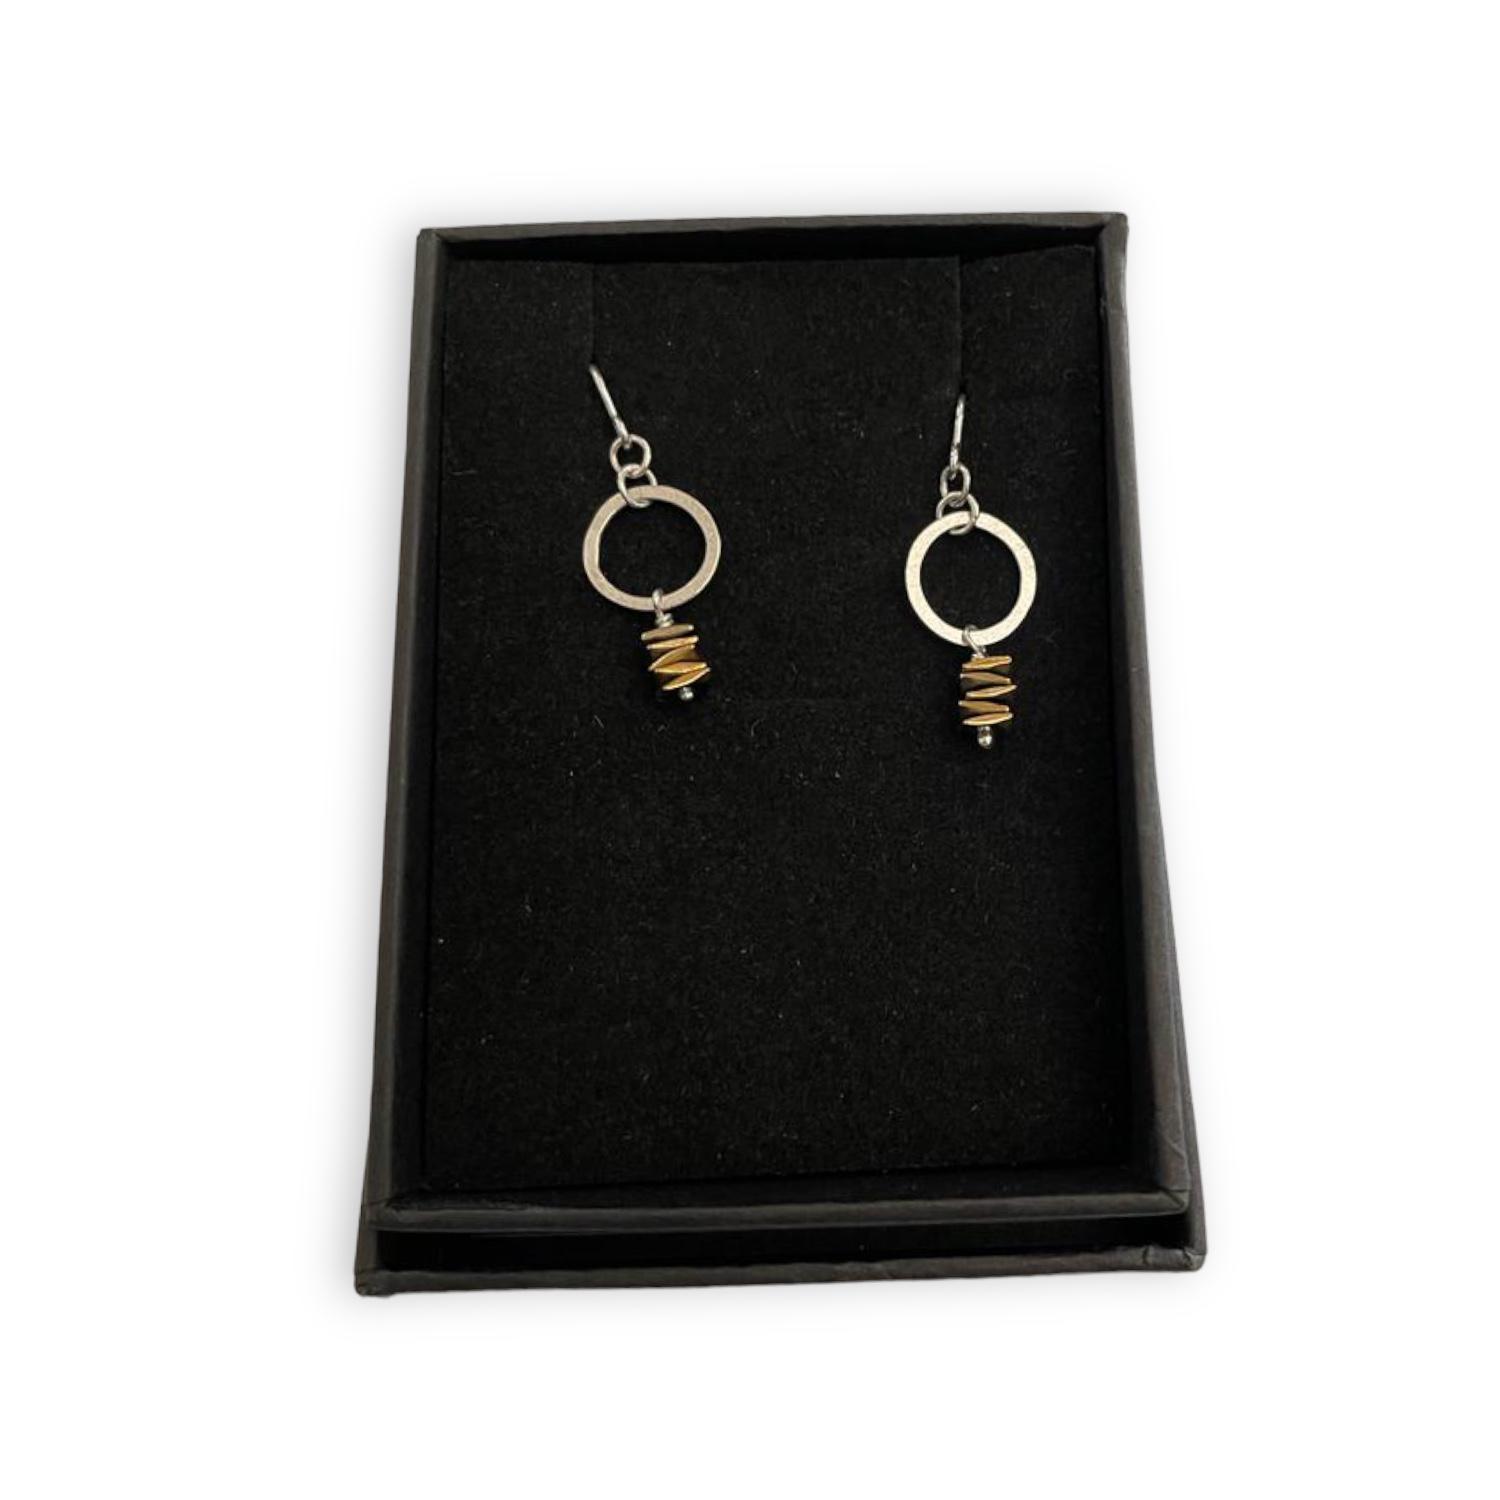 MSJ 105 plane dhematite stack Ring Earrings by Madeleine Spencer Jewellery